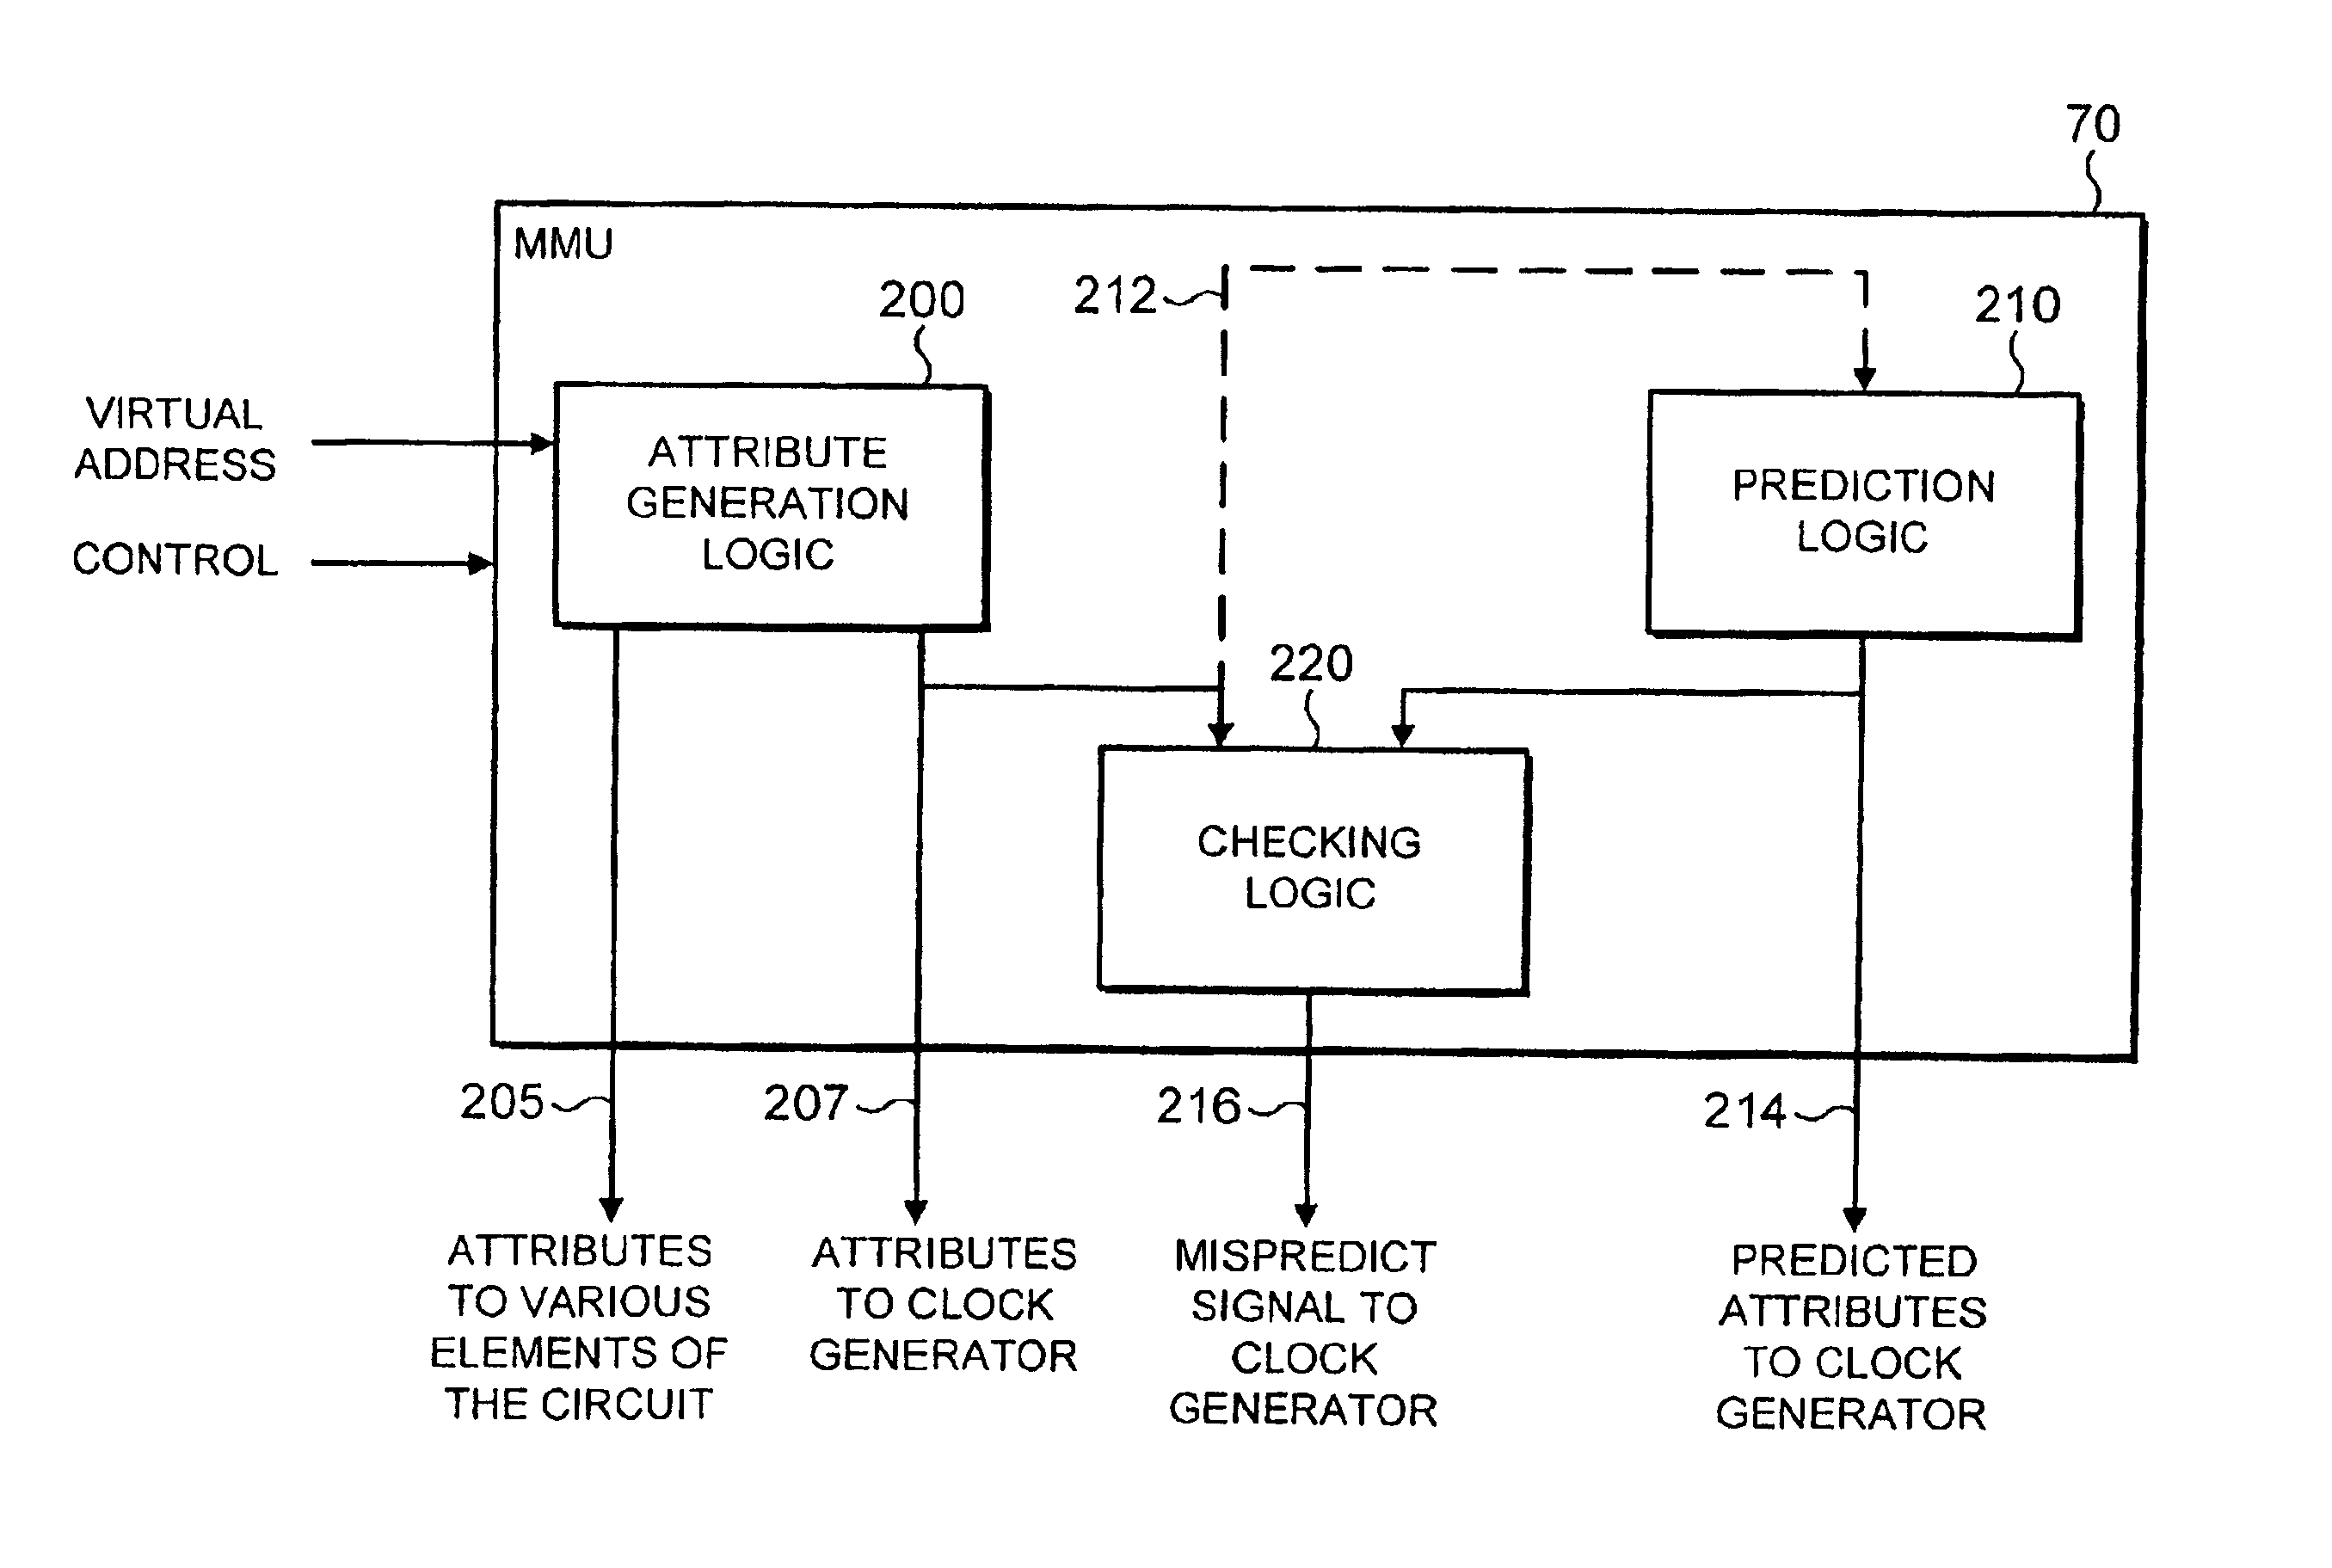 Accessing memory units in a data processing apparatus